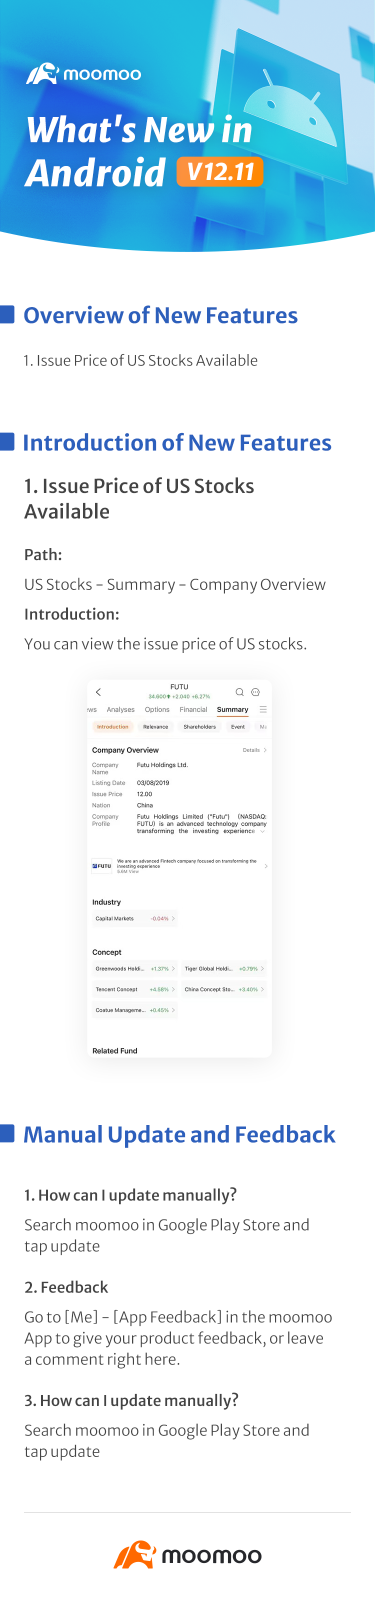 What's New: Issue Price of US Stocks Available in Android v12.11